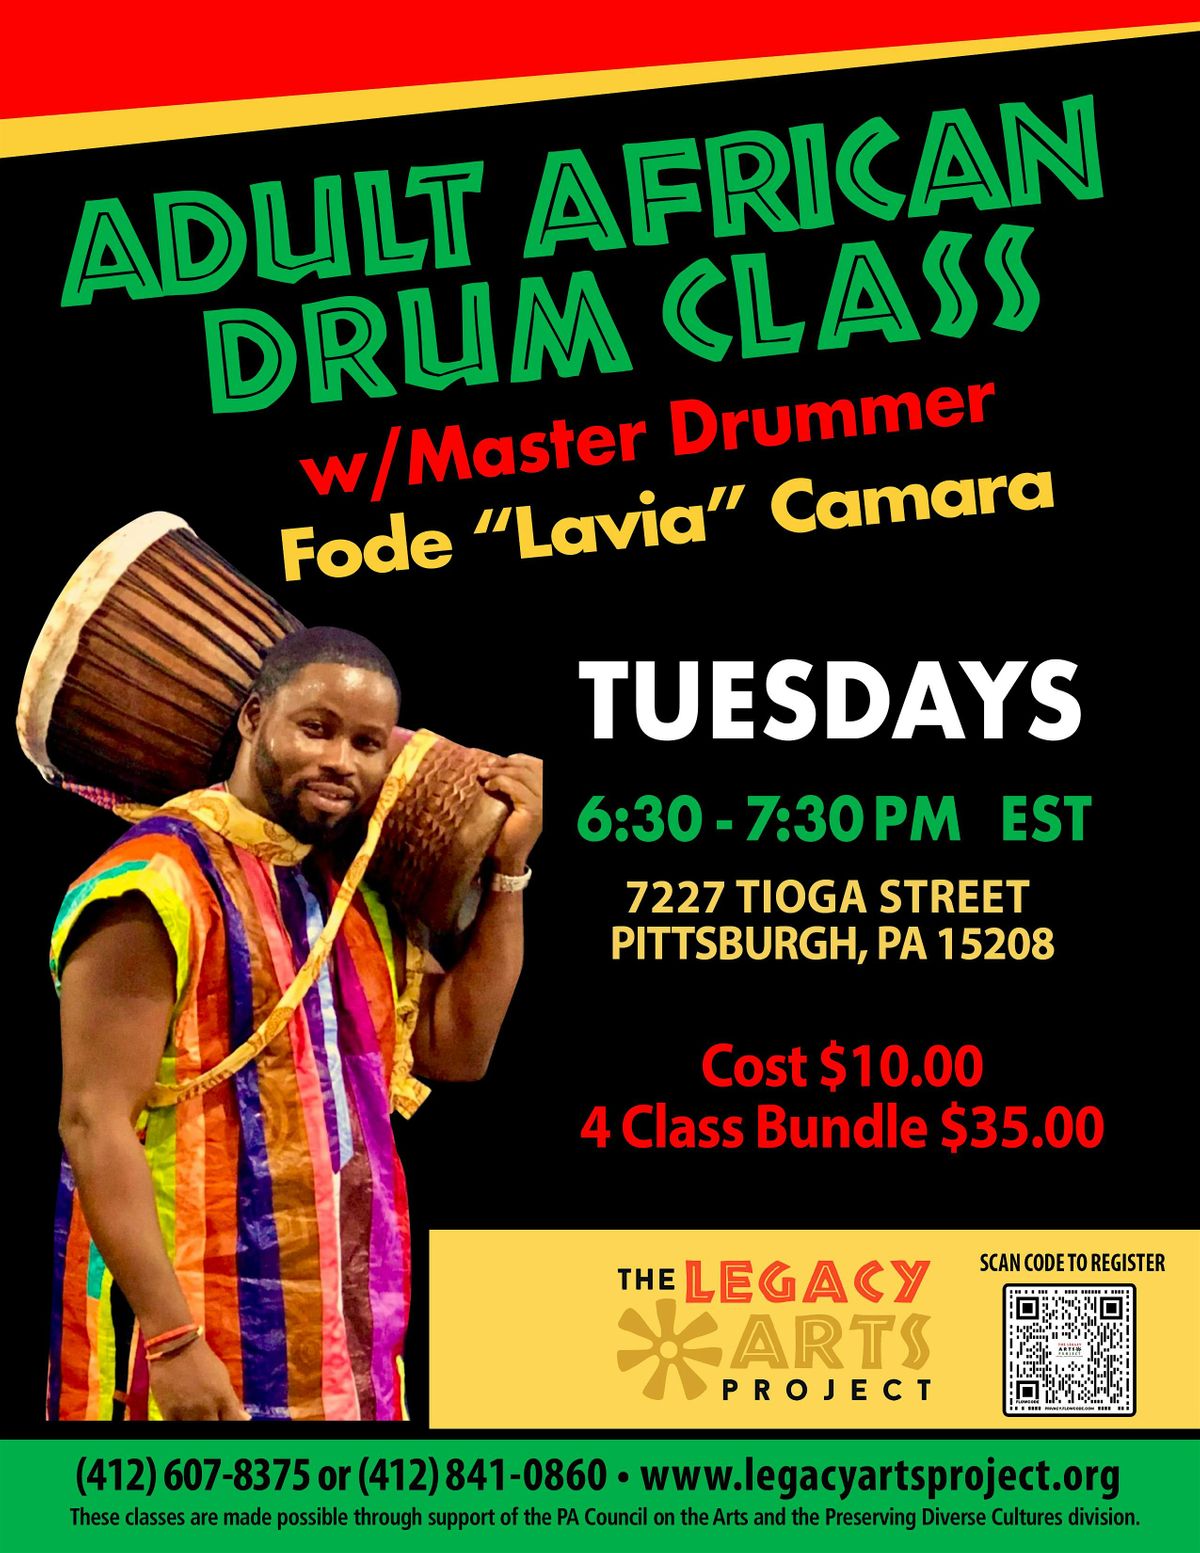 Adult African Drum Class with Fode "Lavia" Camara